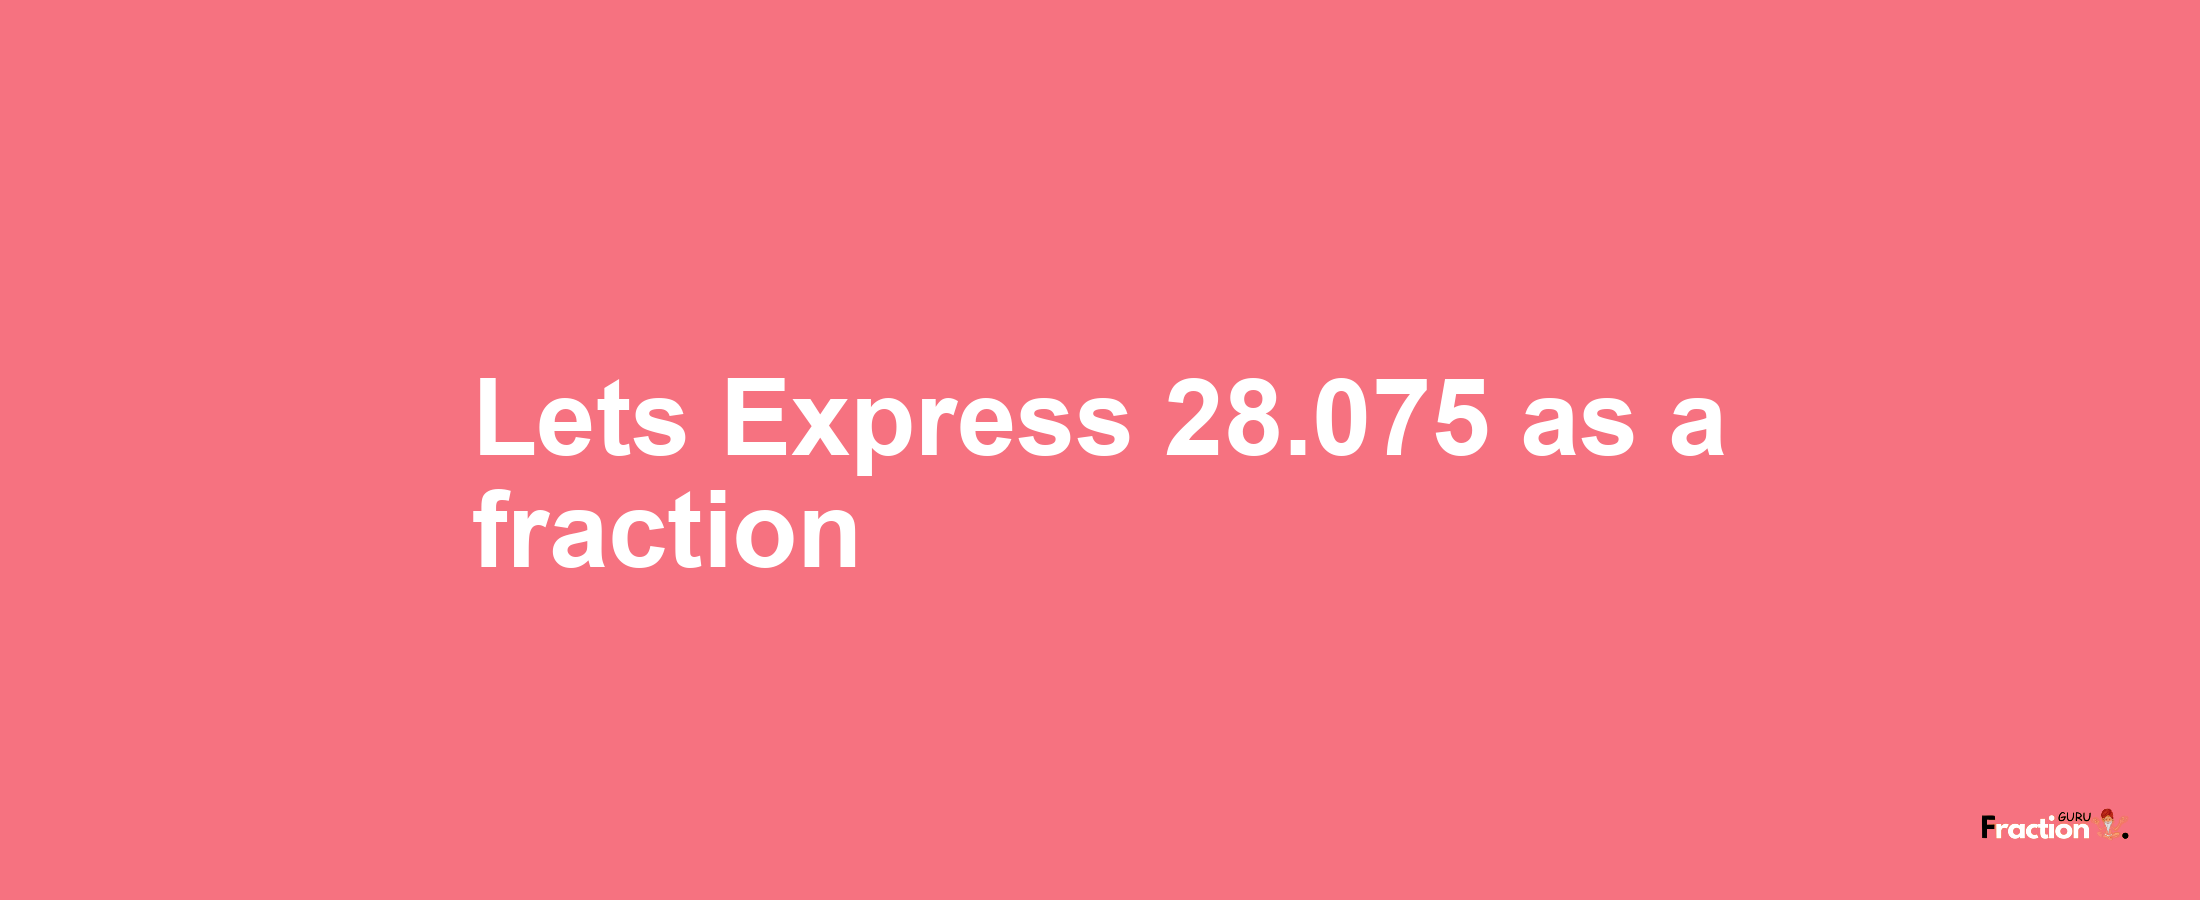 Lets Express 28.075 as afraction